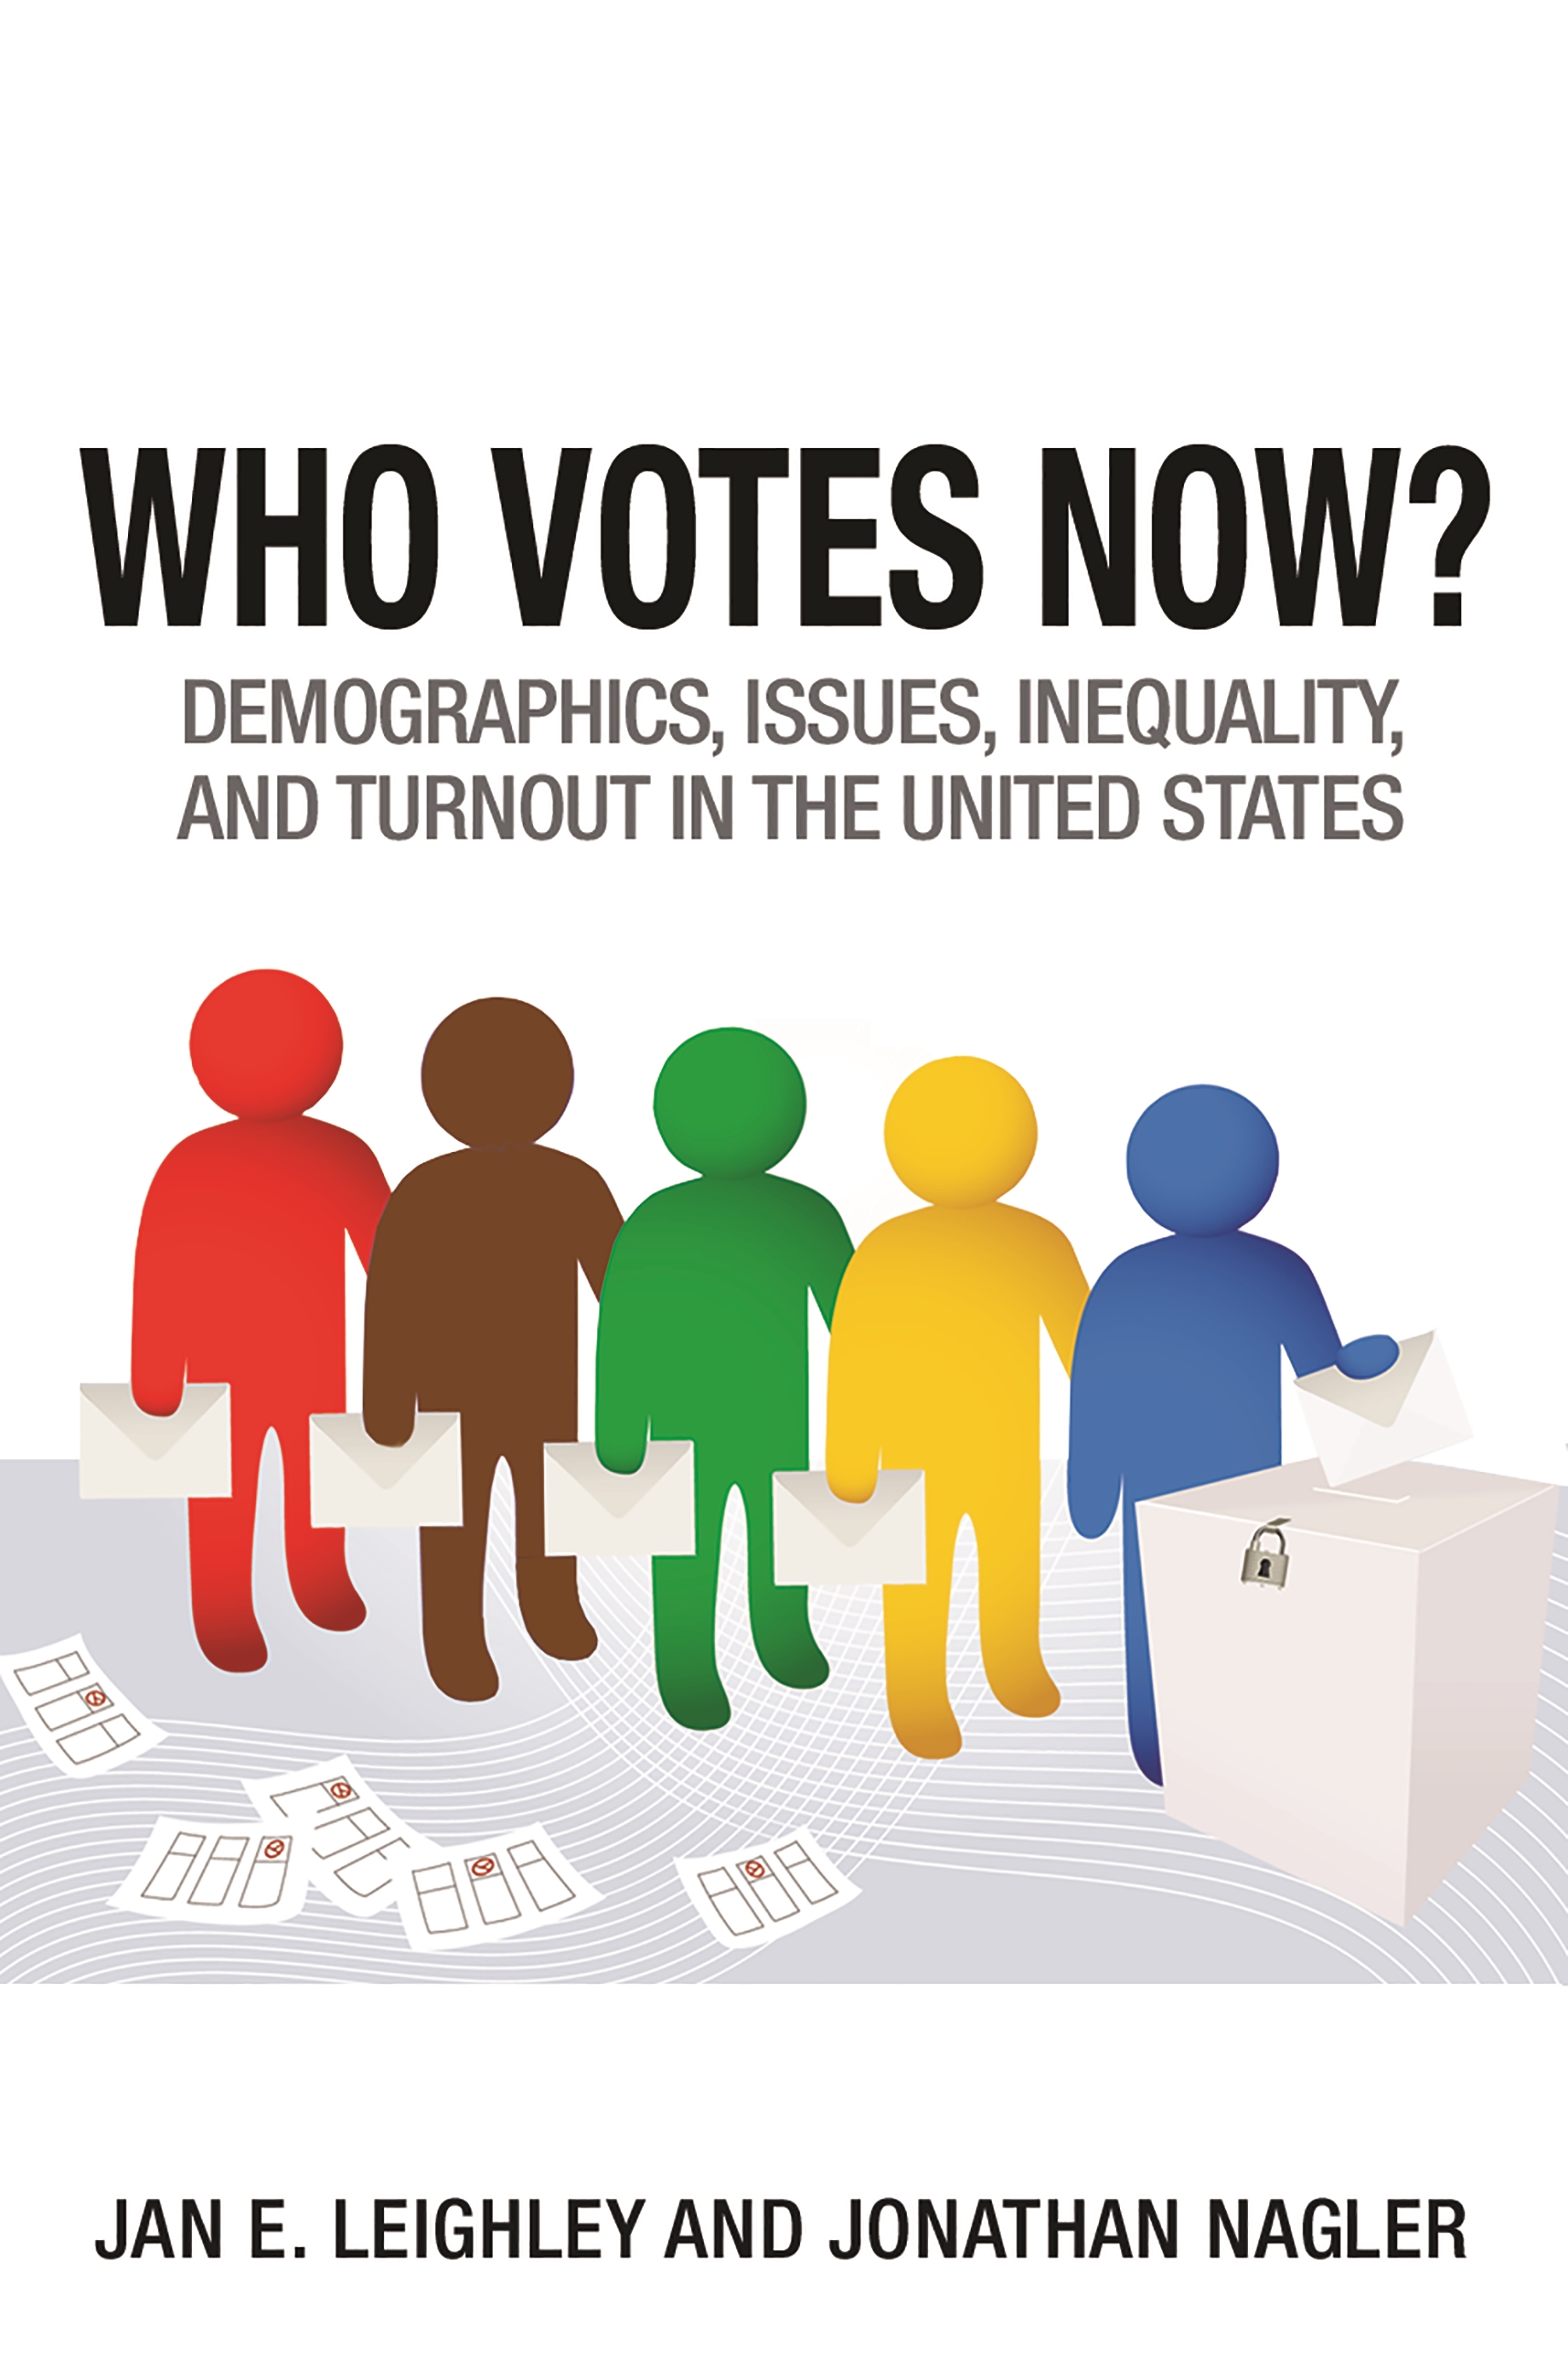 The cover of Who Votes Now?. There is a graphic of people holding ballots in line to vote. The people are different colors (red, brown, green, yellow, blue) and there are ballots on the ground. 